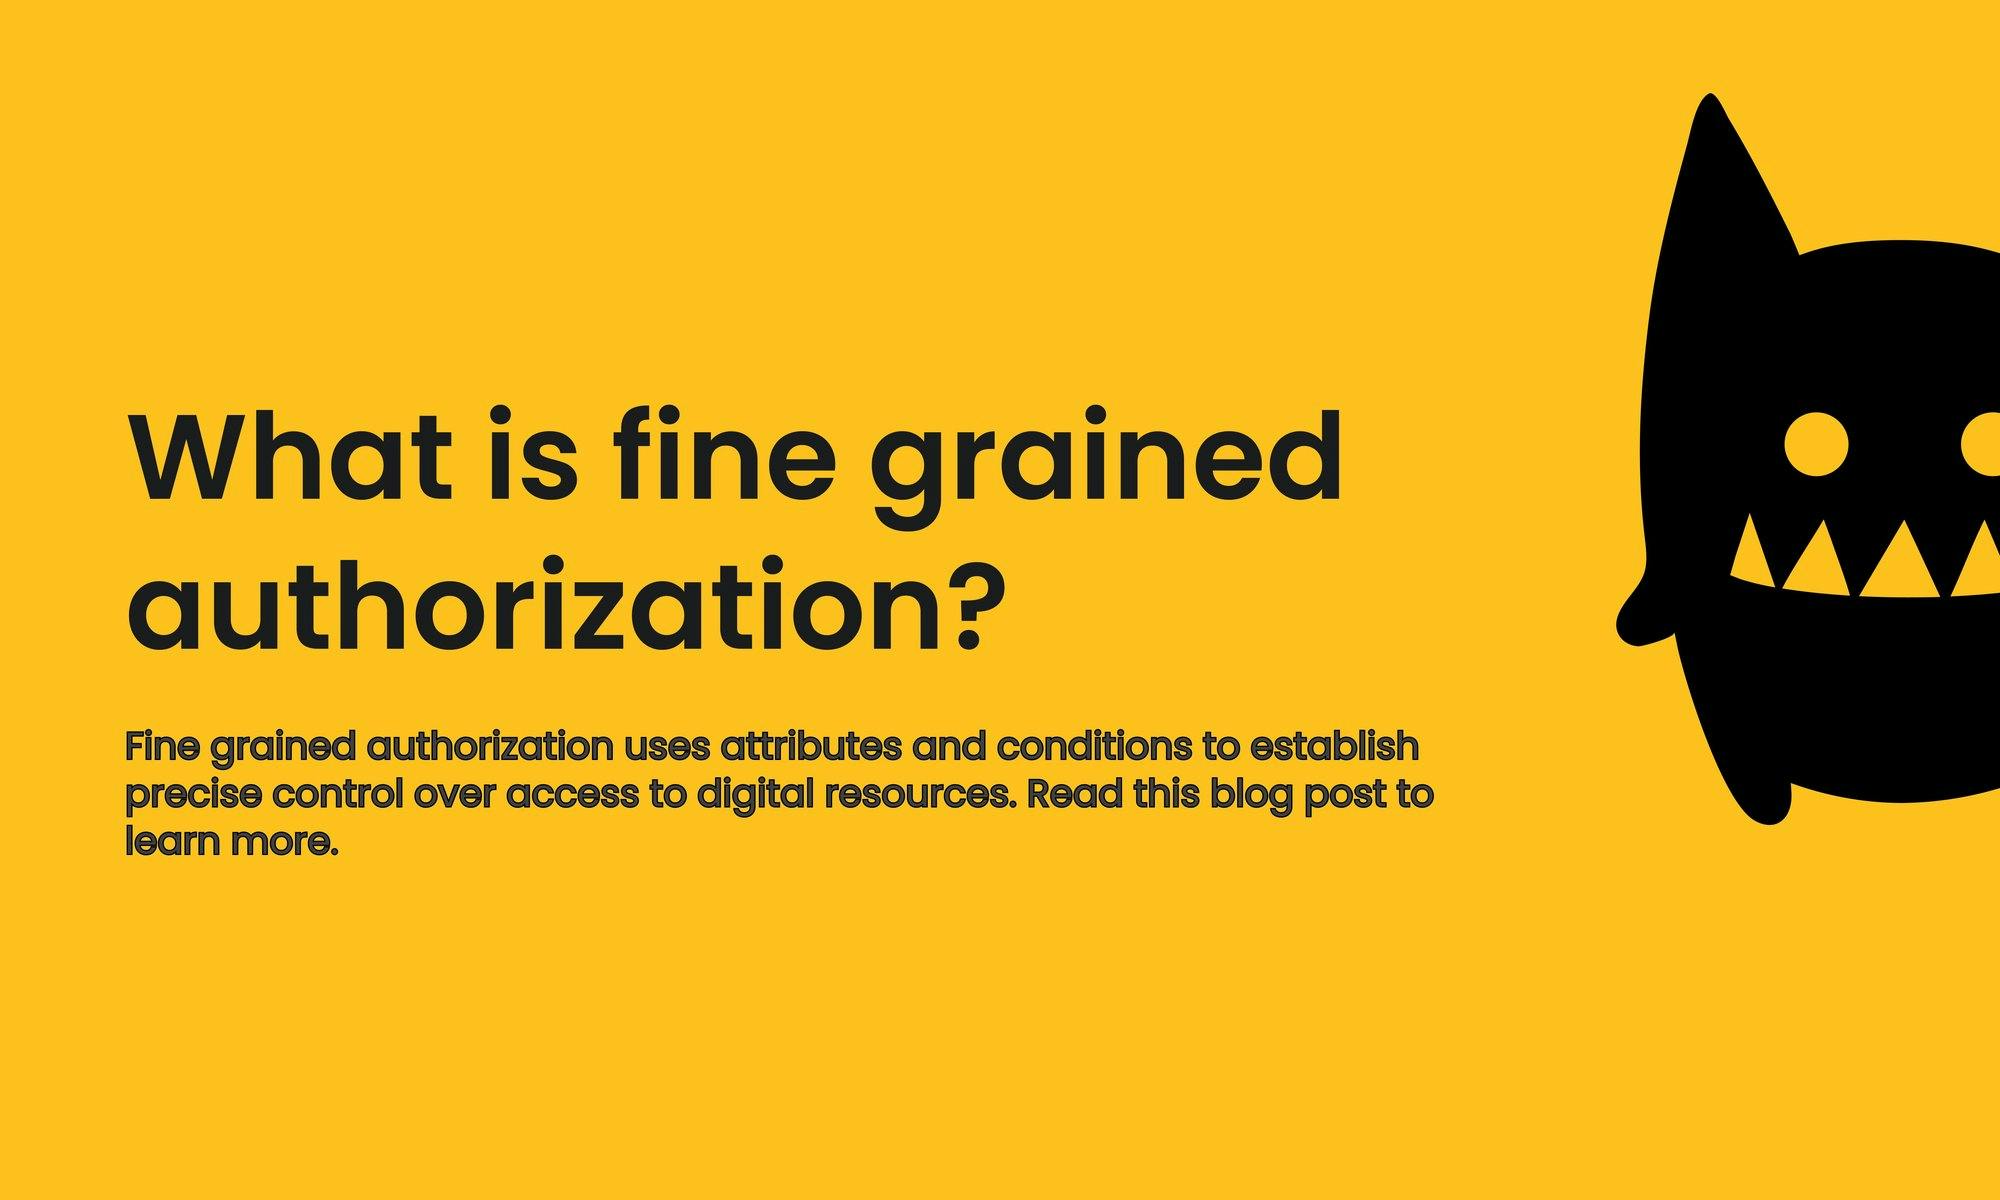 What is fine grained authorization?